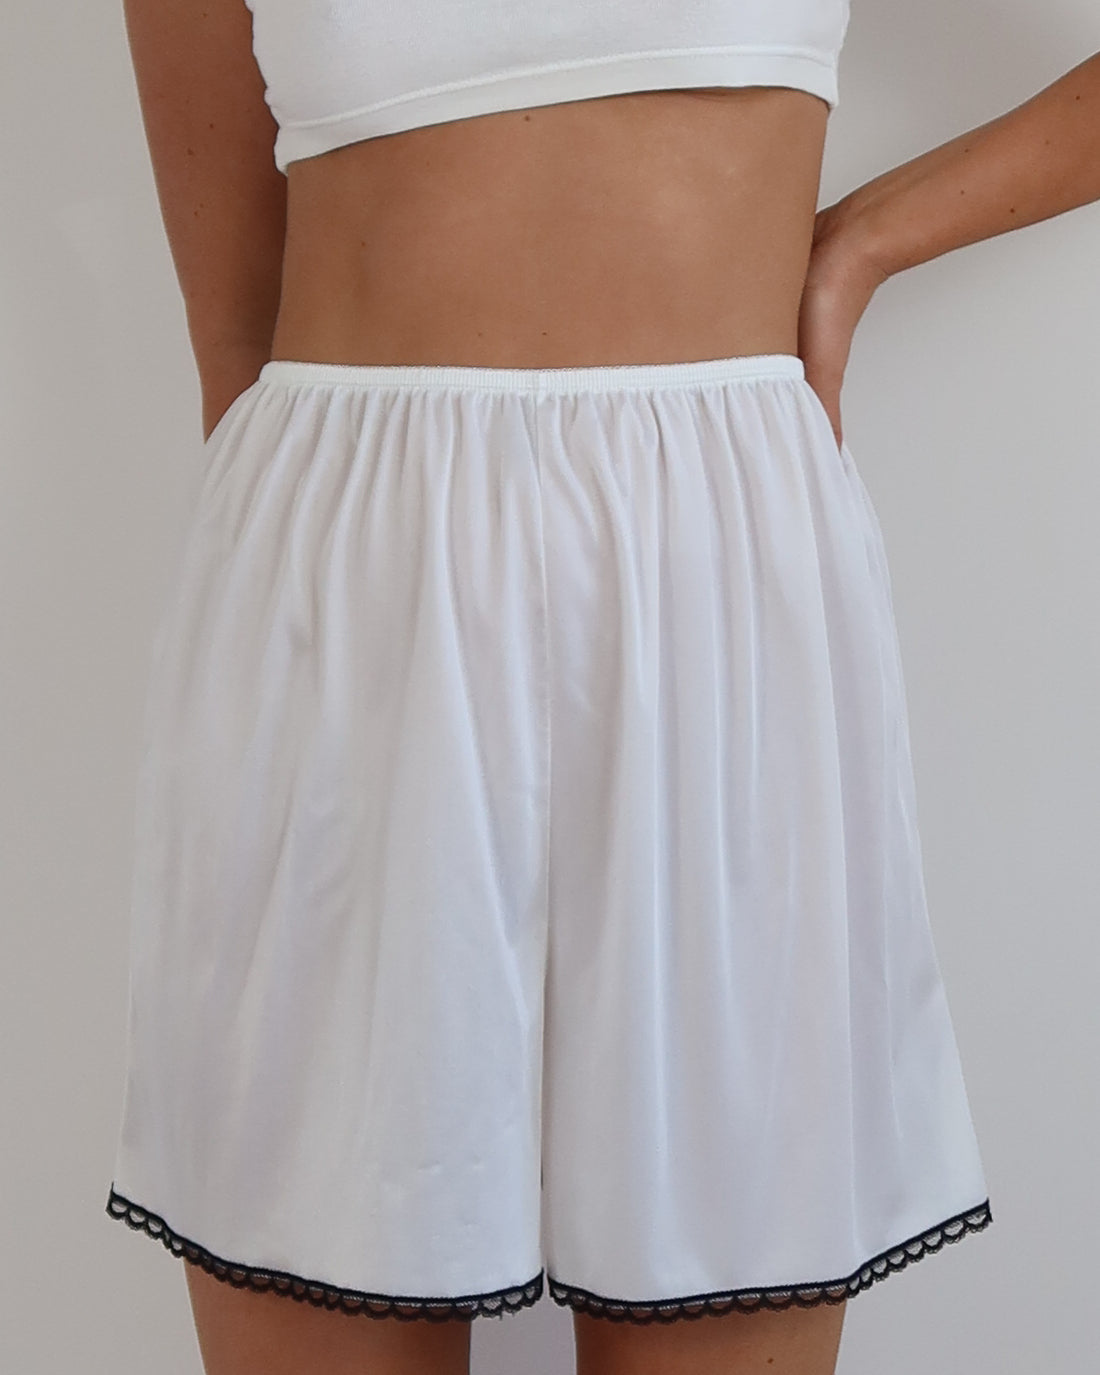 Vintage 80's Silky Shorts